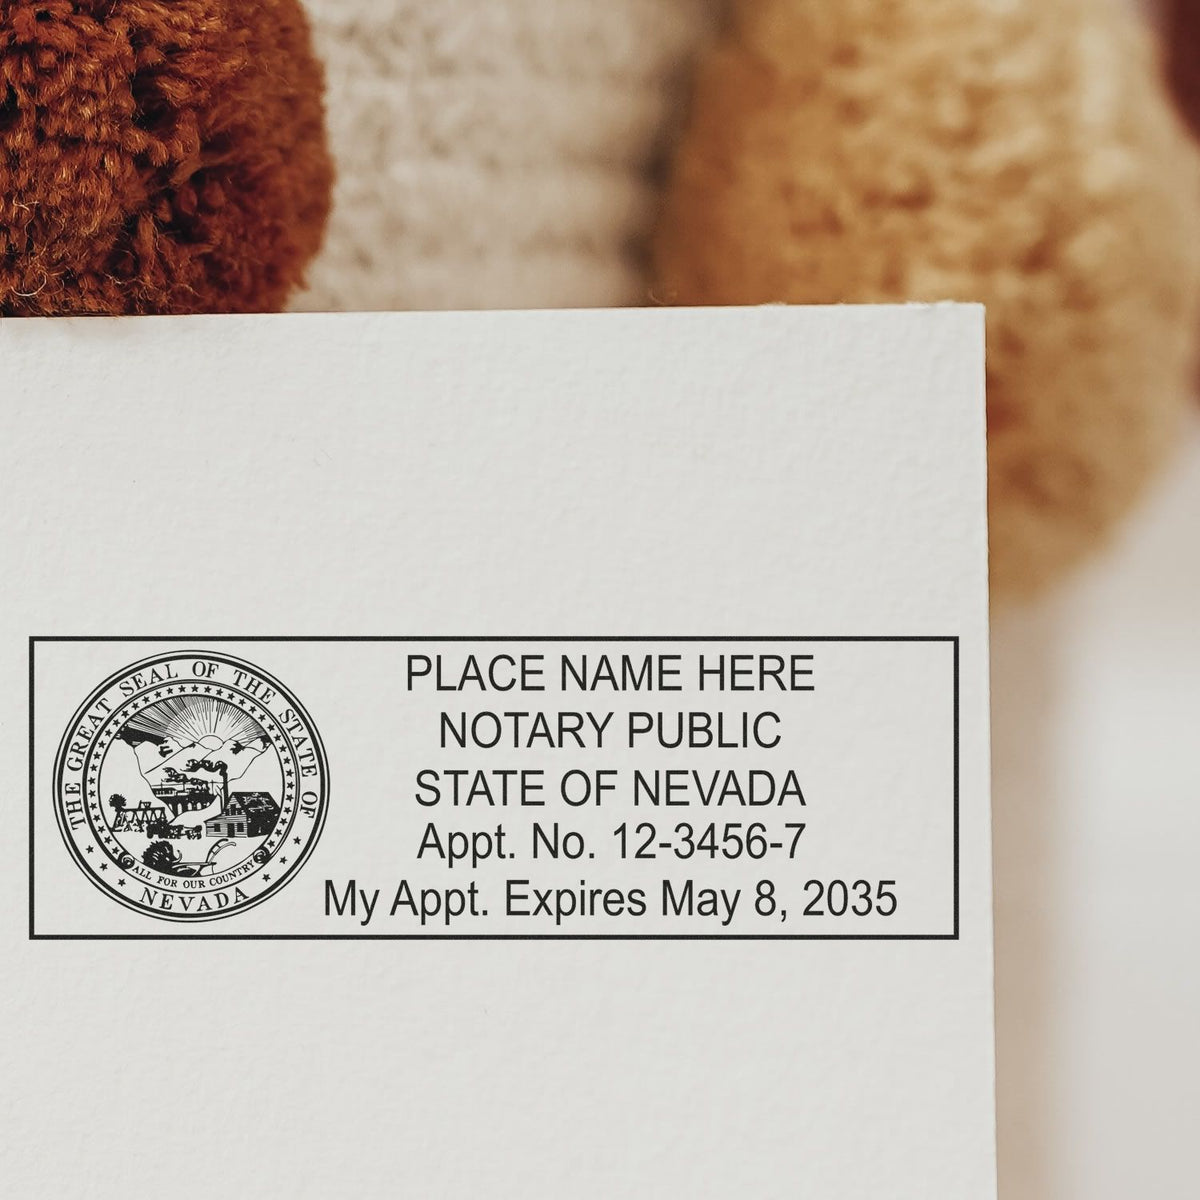 A photograph of the Wooden Handle Nevada State Seal Notary Public Stamp stamp impression reveals a vivid, professional image of the on paper.